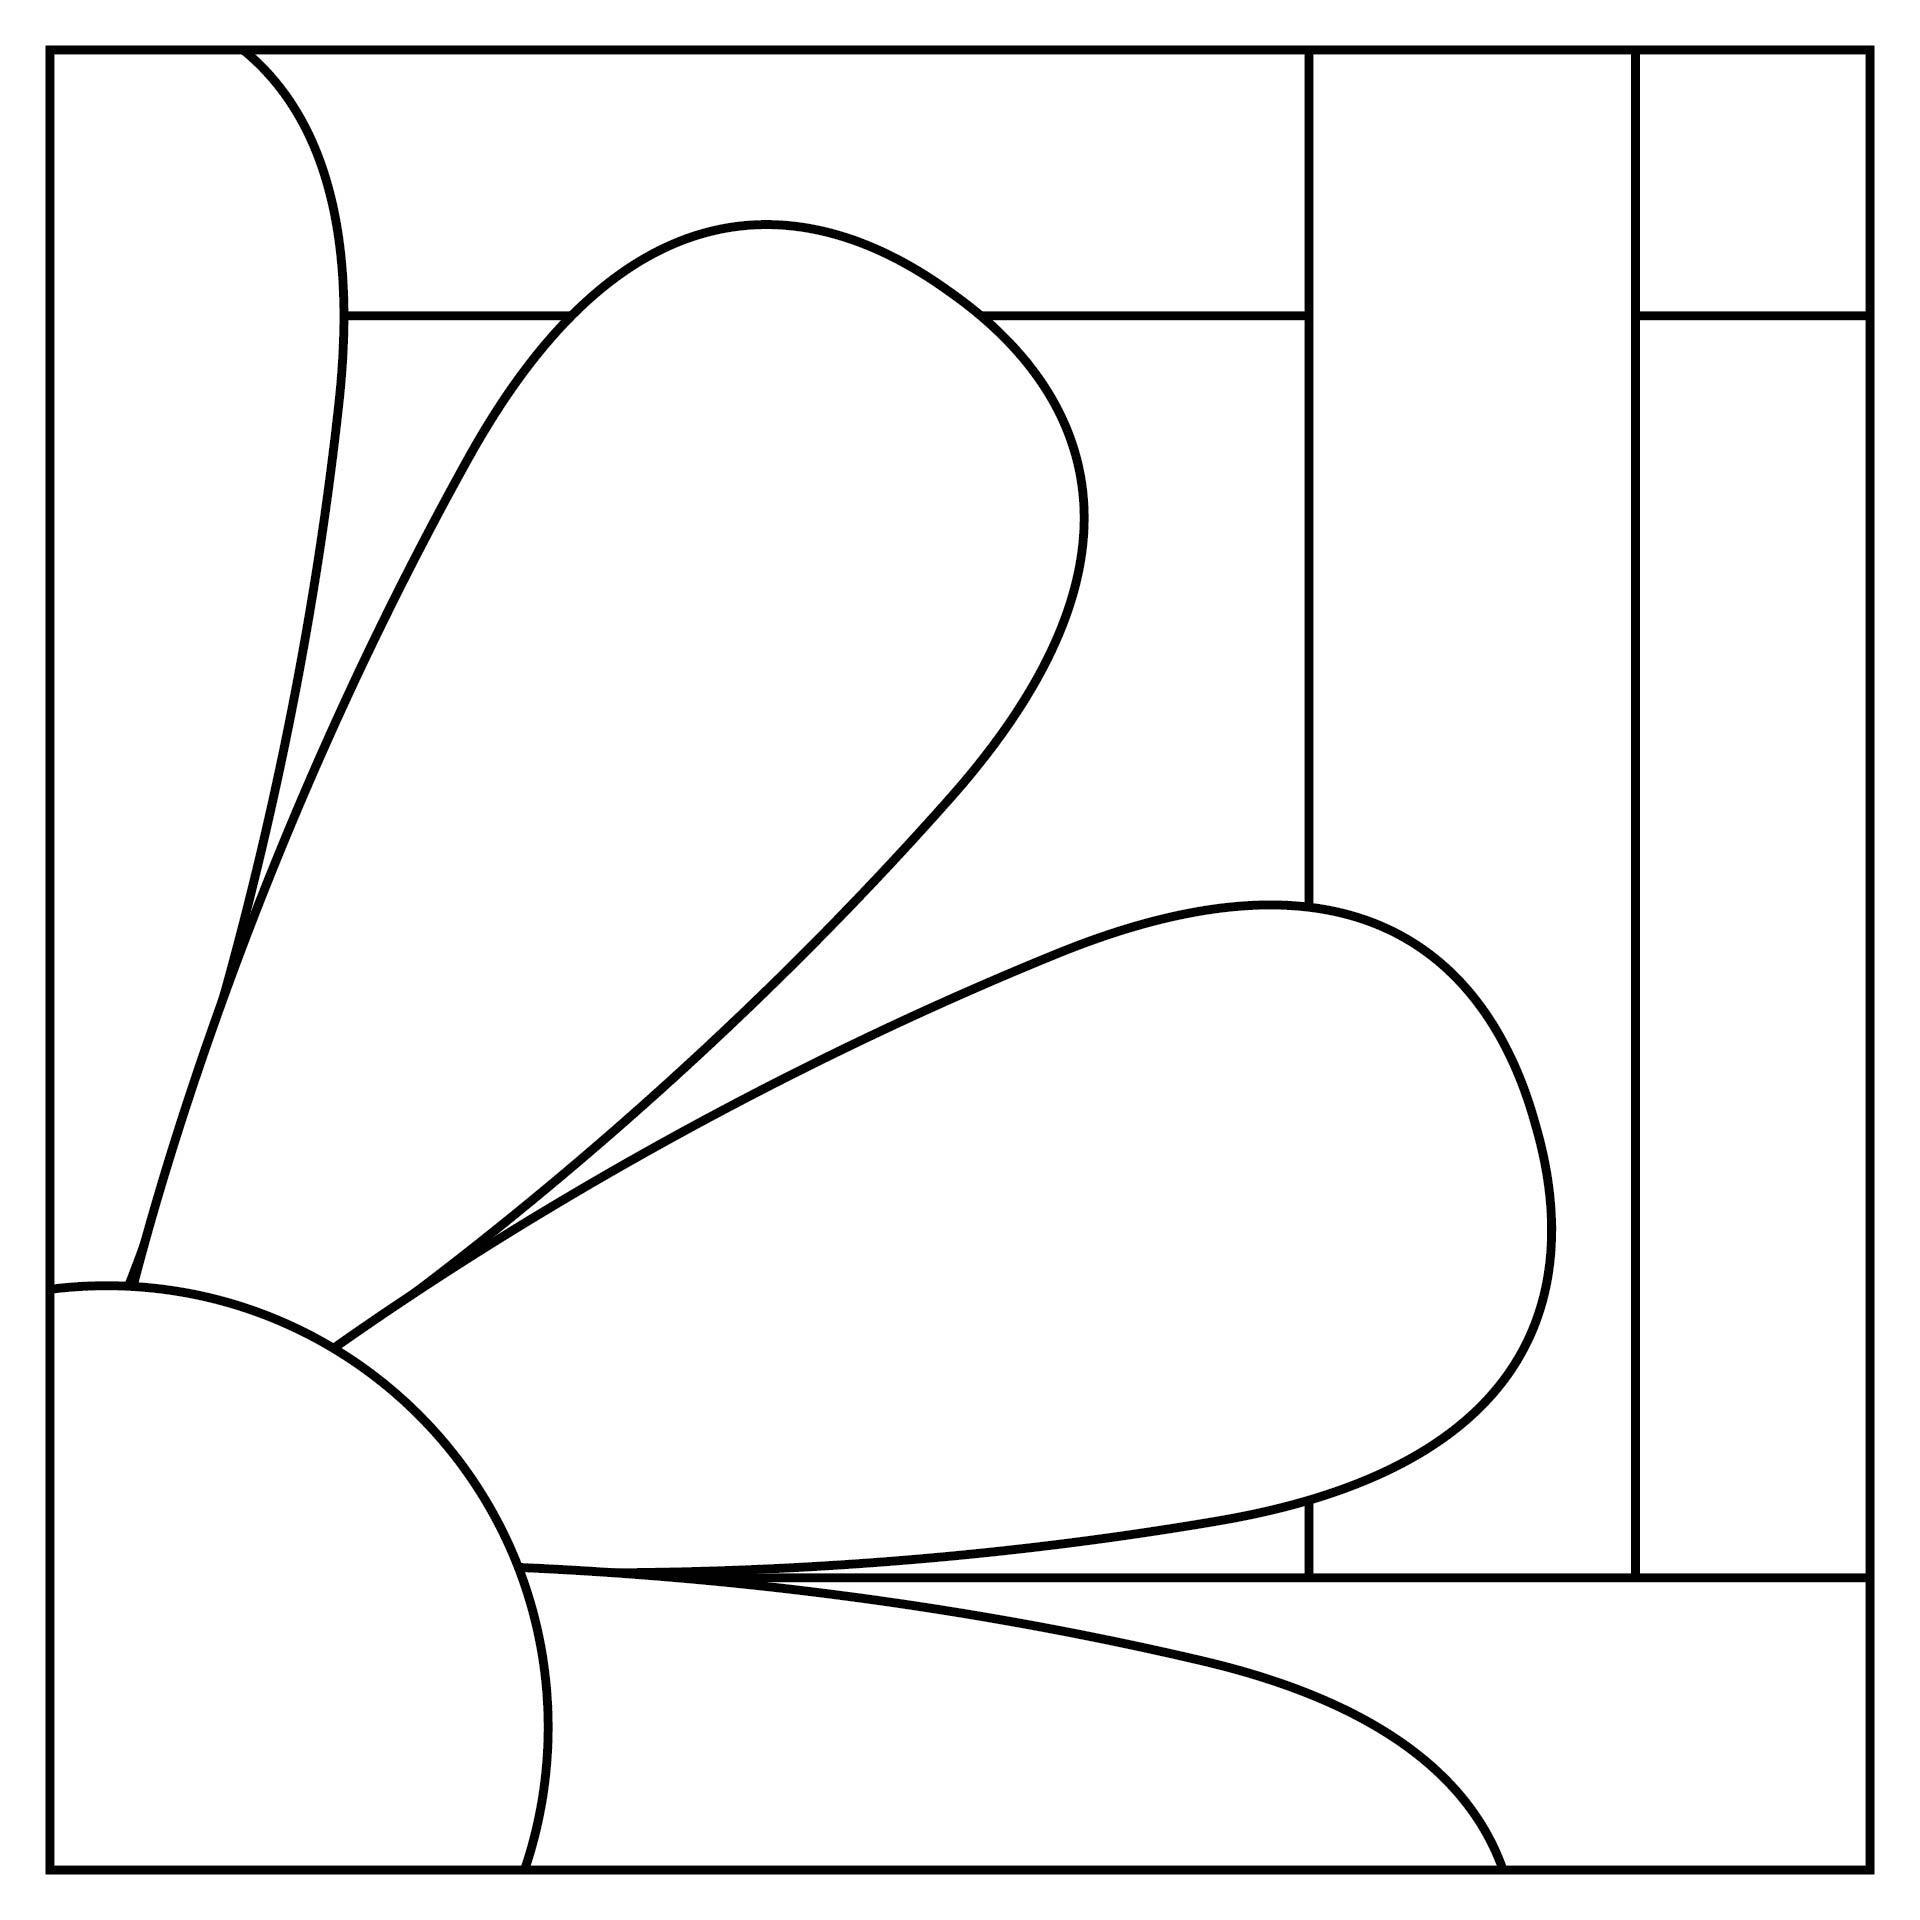 Easy Free Printable Stained Glass Patterns